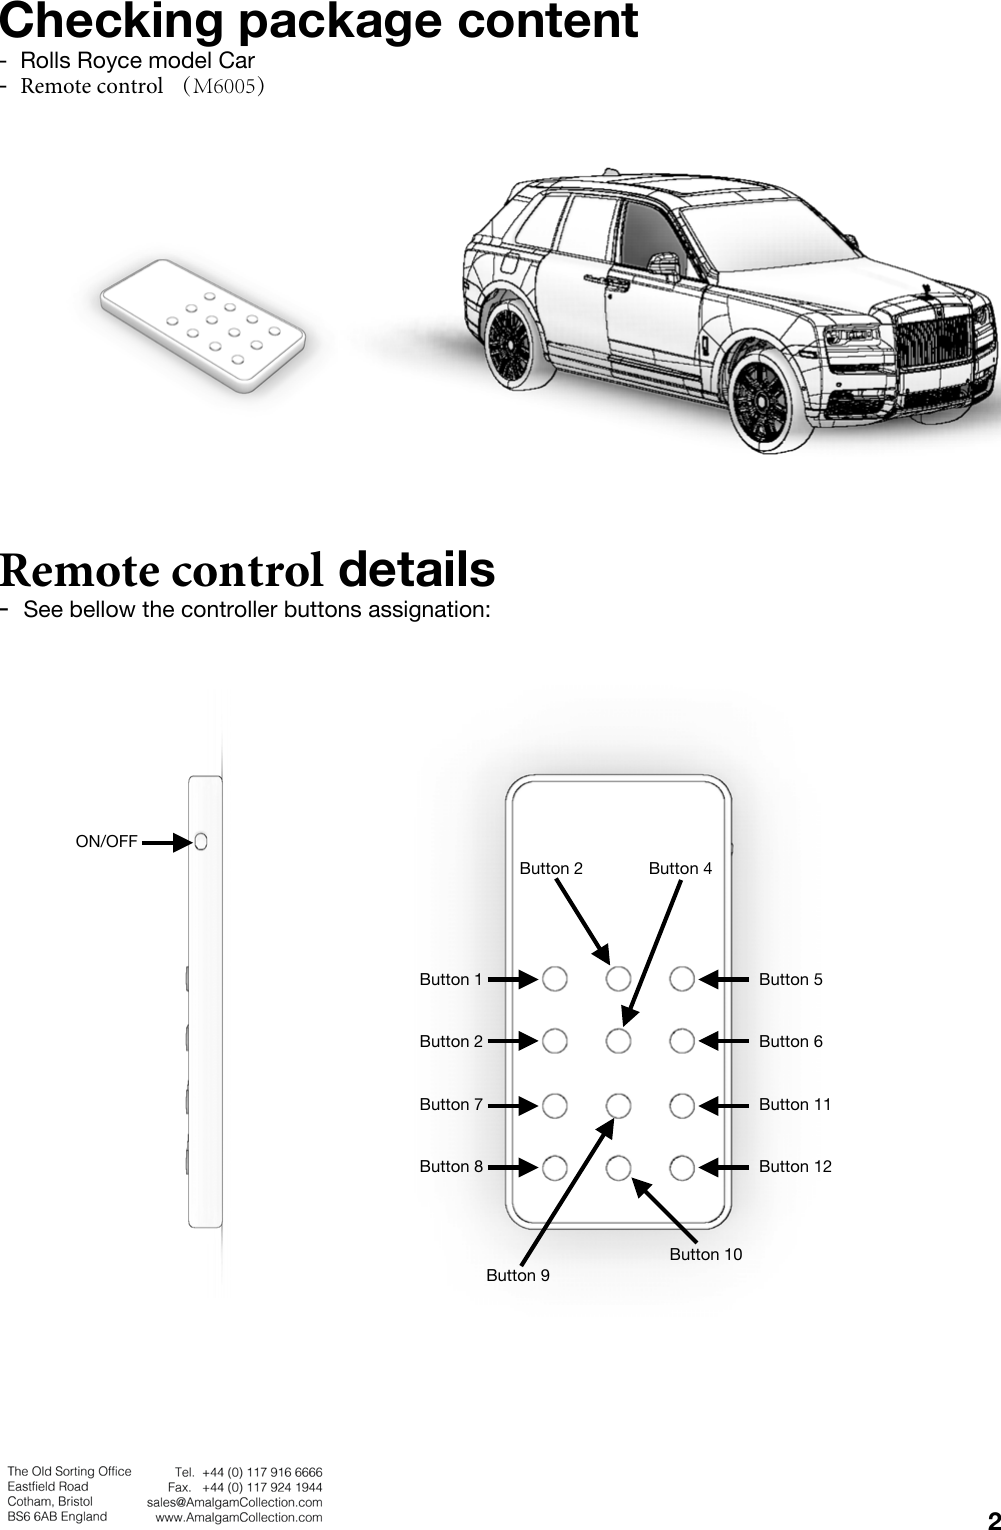 Checking package content - Rolls Royce model Car-Remote control （M6005） Remote control details -See bellow the controller buttons assignation:&quot;2ON/OFFButton 1Button 2Button 7Button 8Button 5Button 6Button 11Button 12Button 9Button 10Button 4Button 2